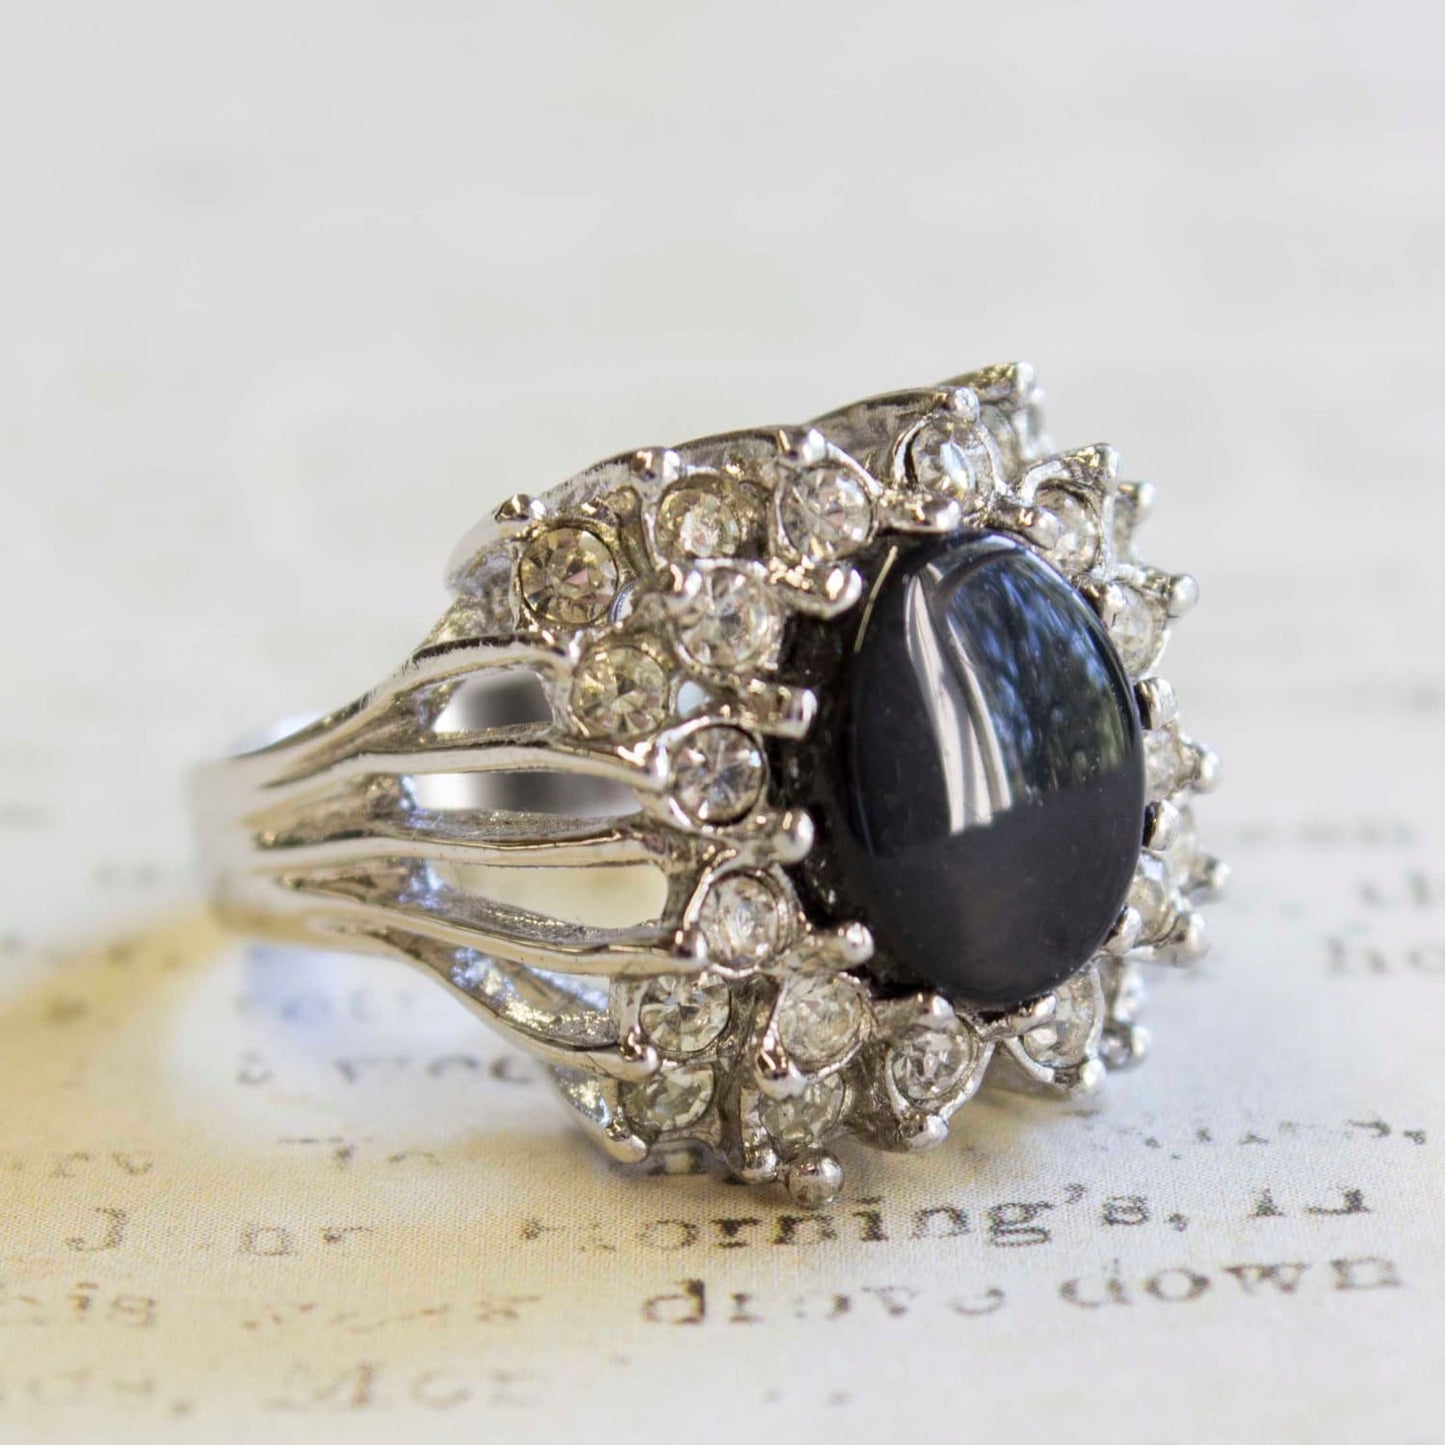 Vintage Ring Genuine Onyx Ring Clear Swarovski Crystals 18k White Gold Silver Plated #R199 - Limited Stock - Never Worn